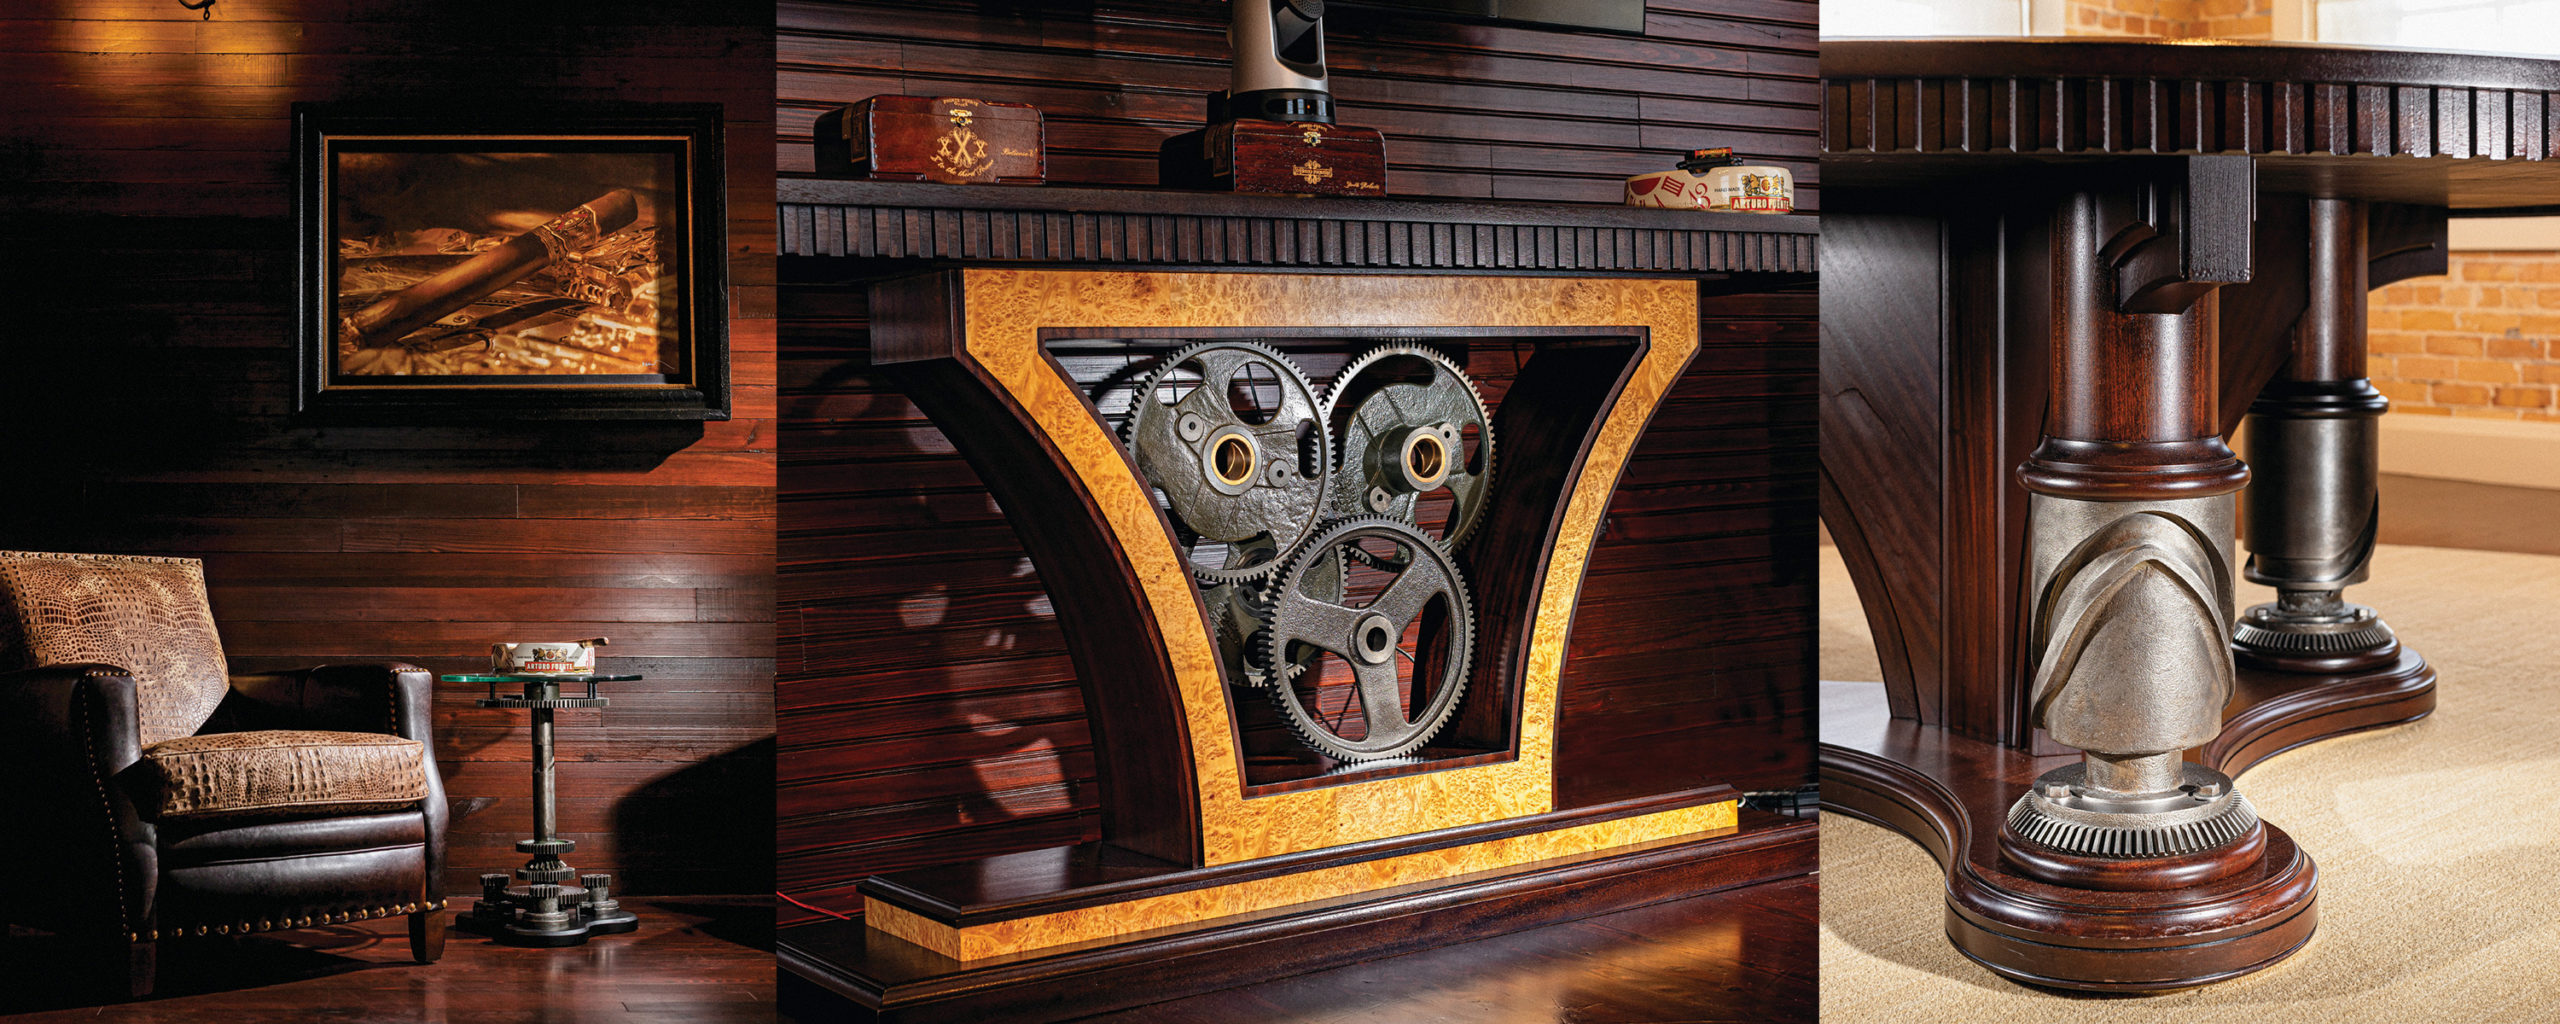 S+L’s craftsmanship is on display with these metal gears from cigar making machines built into furniture for Arturo Fuente Cigars.